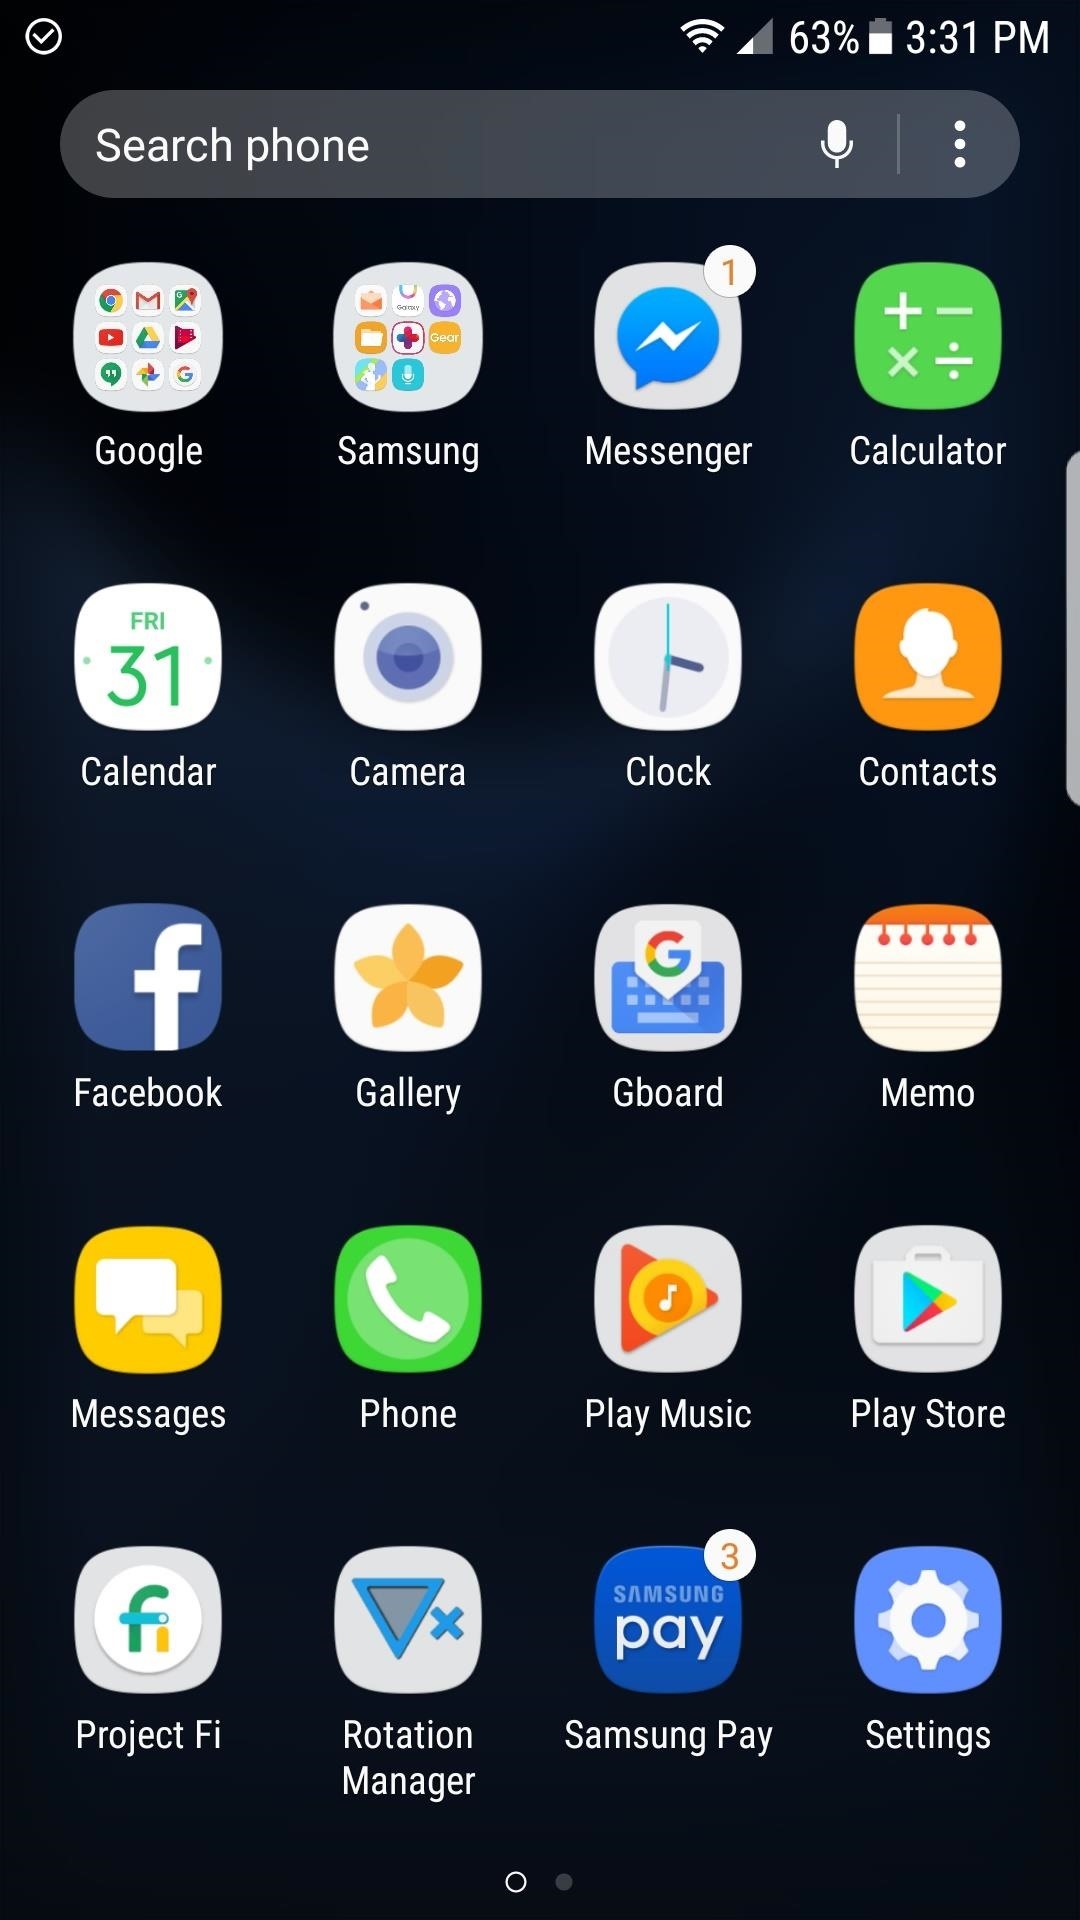 Get the Galaxy S8's Brand New Launcher on Your S7 or S7 Edge—No Root Needed